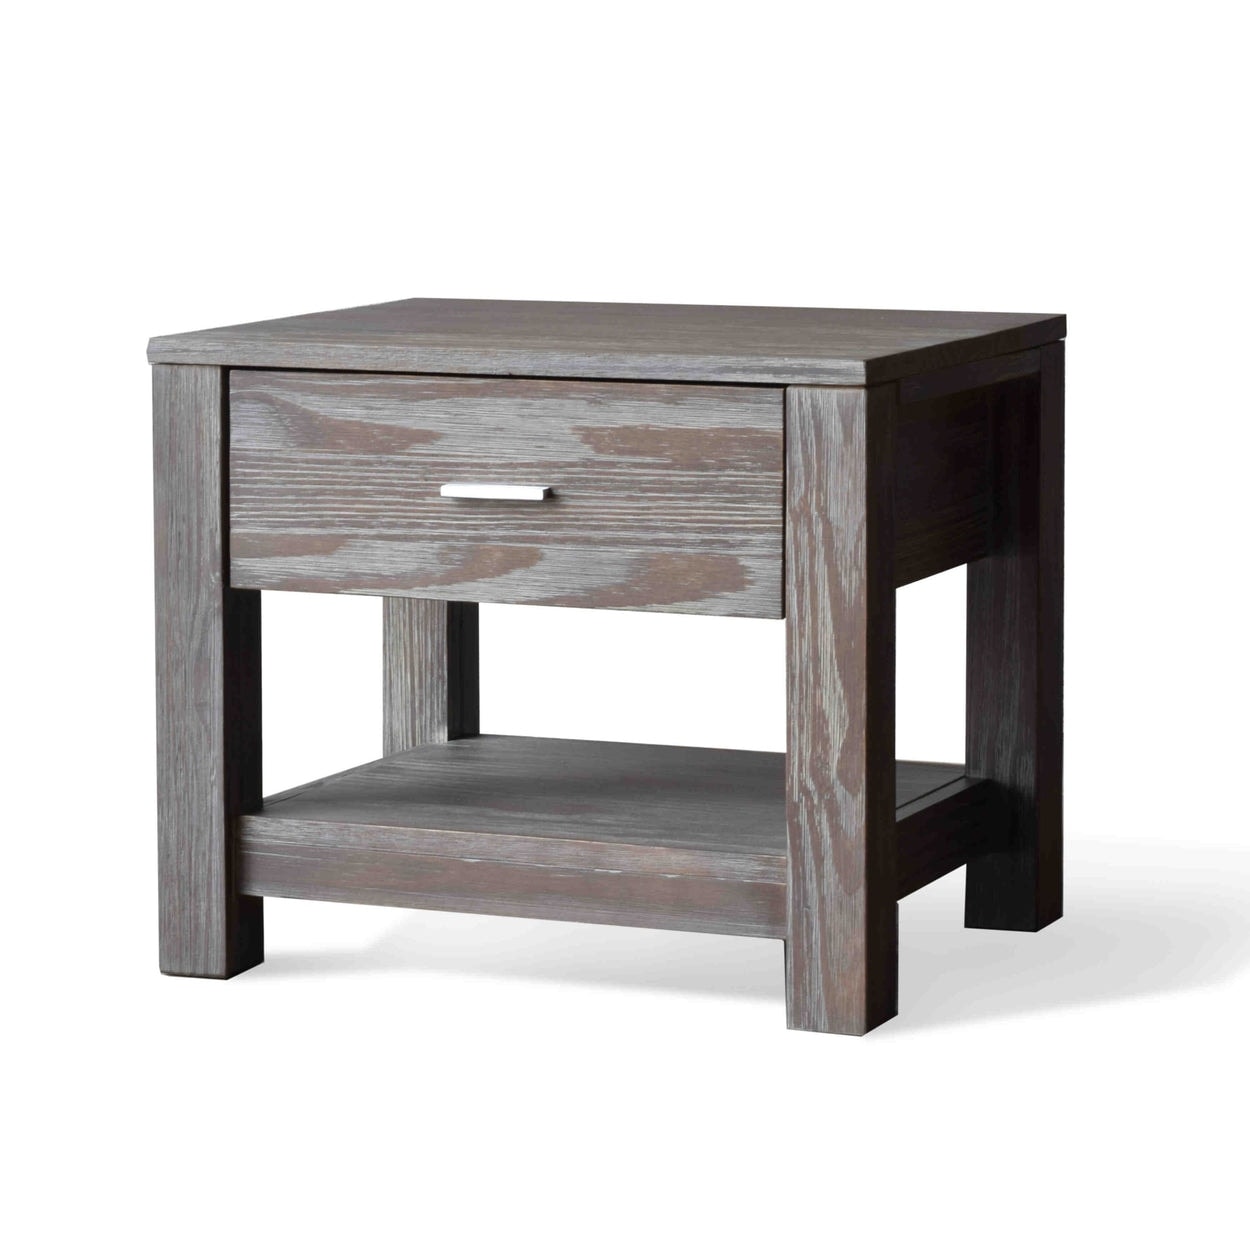 Details about   Grain Wood Furniture Loft Solid Wood 1-drawer Nightstand weathered  pine 1-drawe 